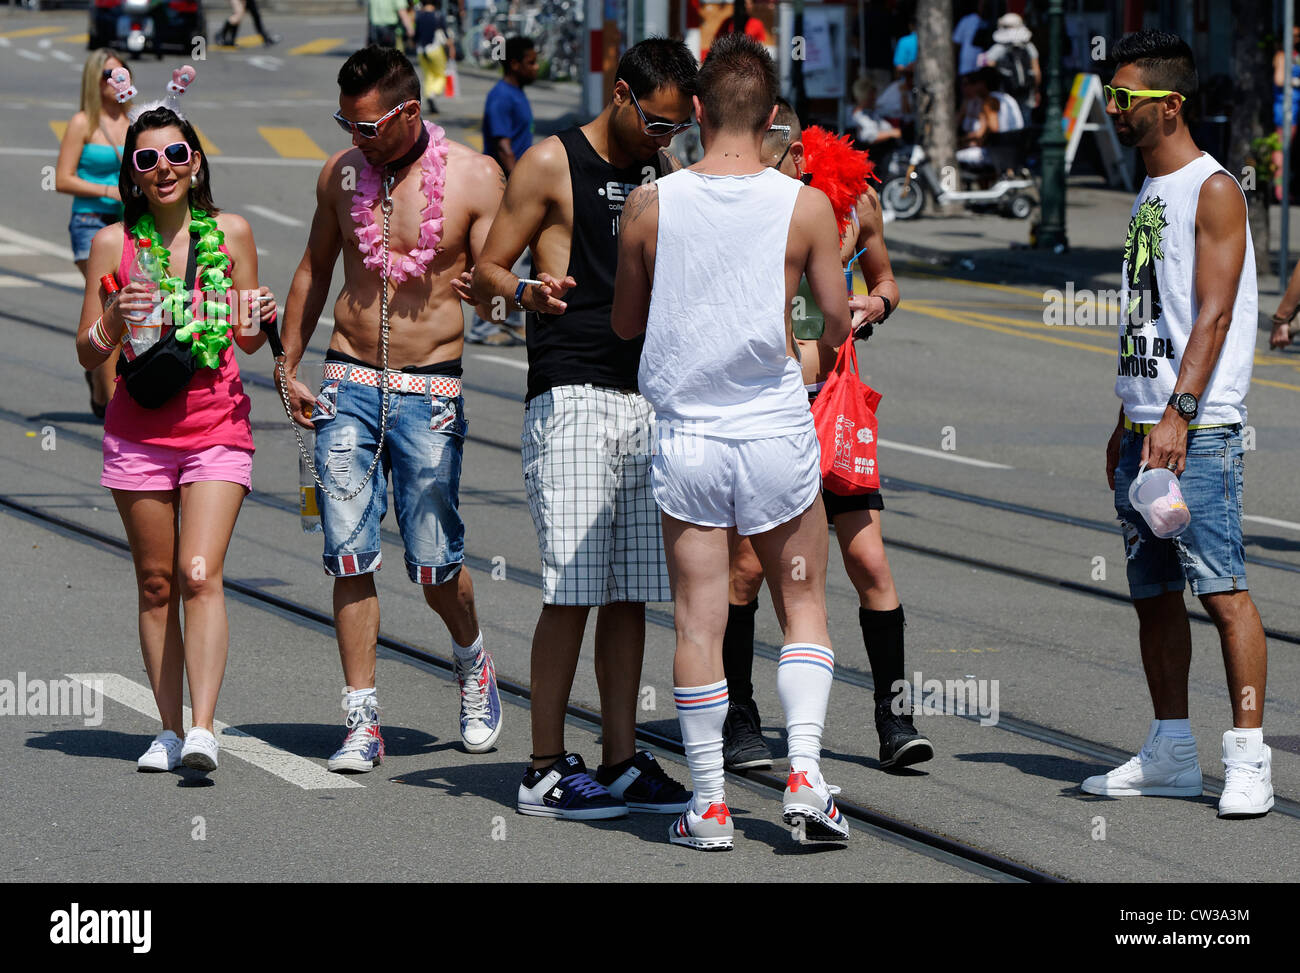 Revelers at the Zurich Street Parade, a techno and trance festival. Stock Photo